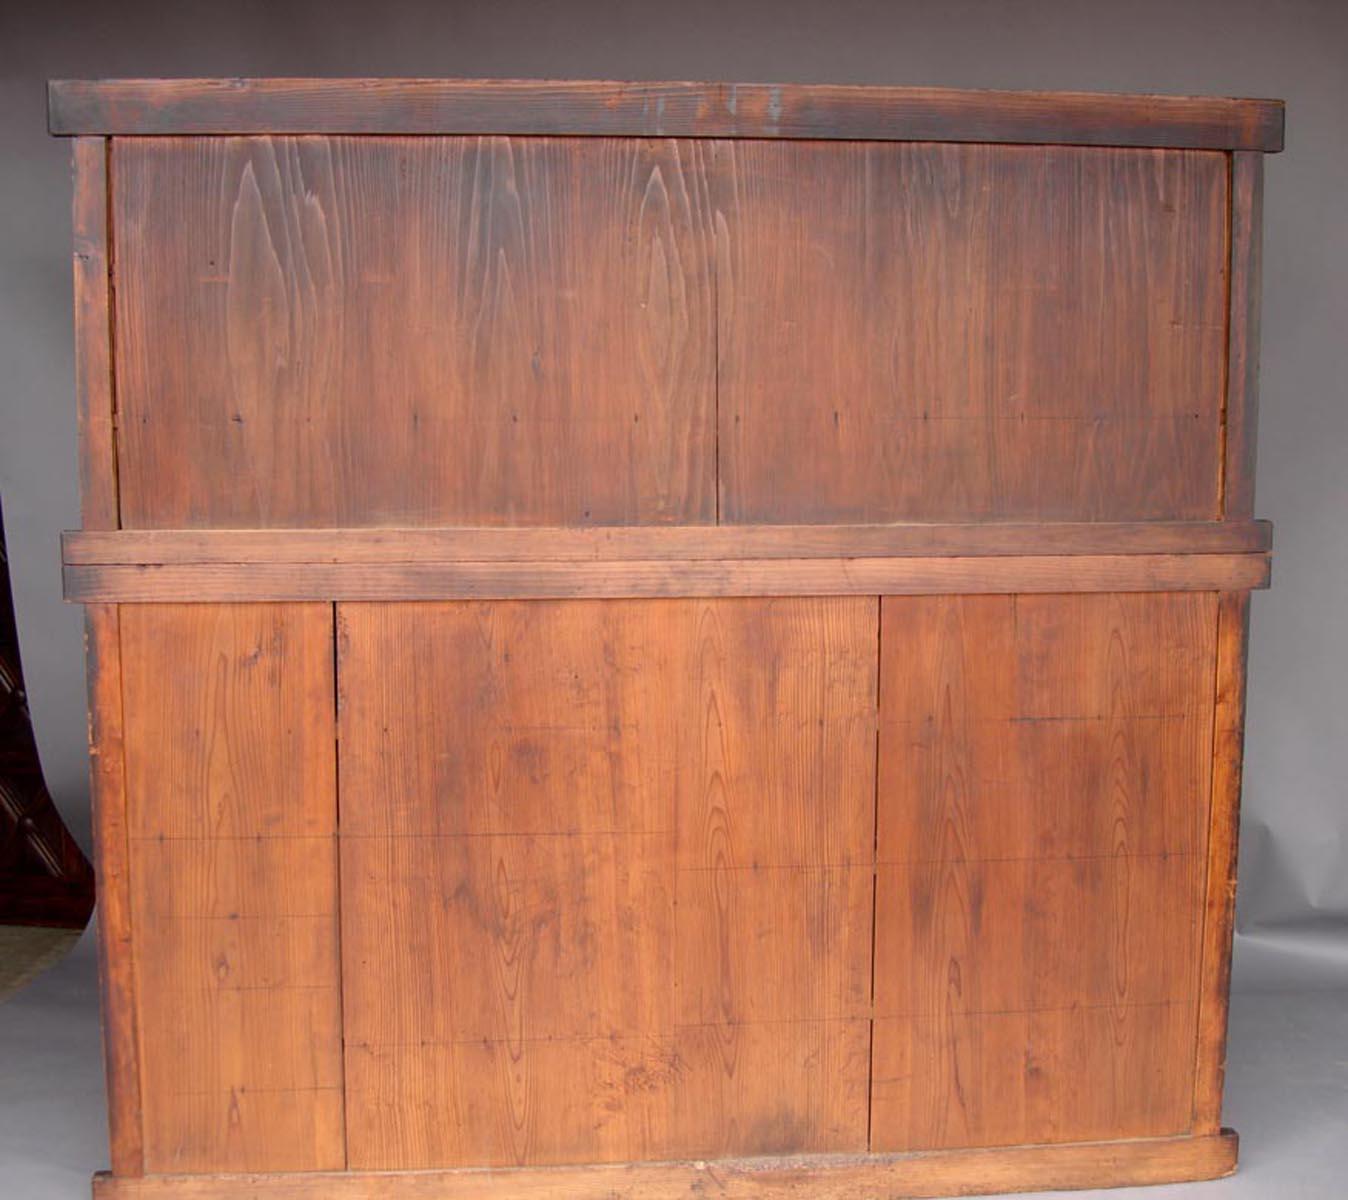 Hinoki wood shop cabinet with sliding doors, multiple drawers and doors, circa 1850s. Bamboo nails and original hardware. This cabinet consists of two pieces. Beautiful rich honey colored patina. All door and drawers function smoothly. In very good